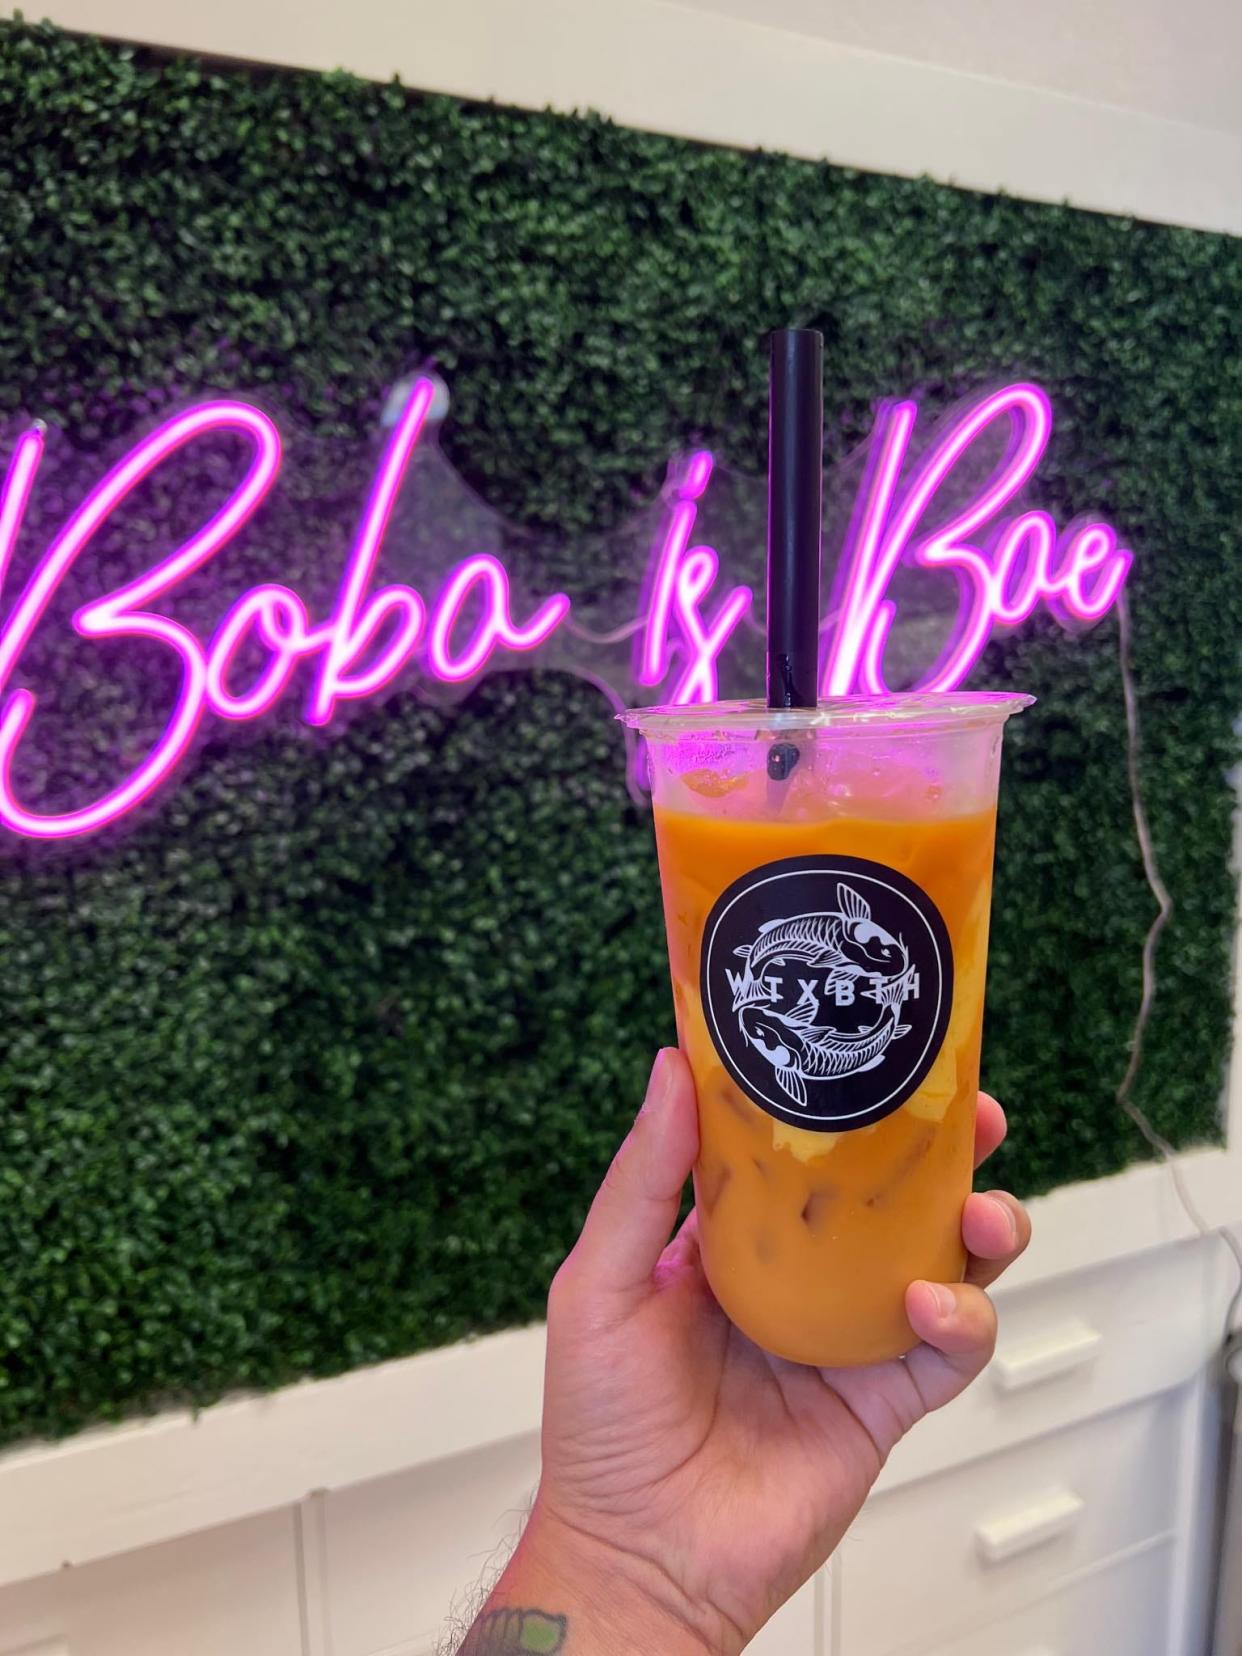 The WTX Boba Teahouse is opening its doors in San Angelo on Thursday, Dec. 16, 2021 offering Asian Food, Korean corn dogs, rice bowls and more.